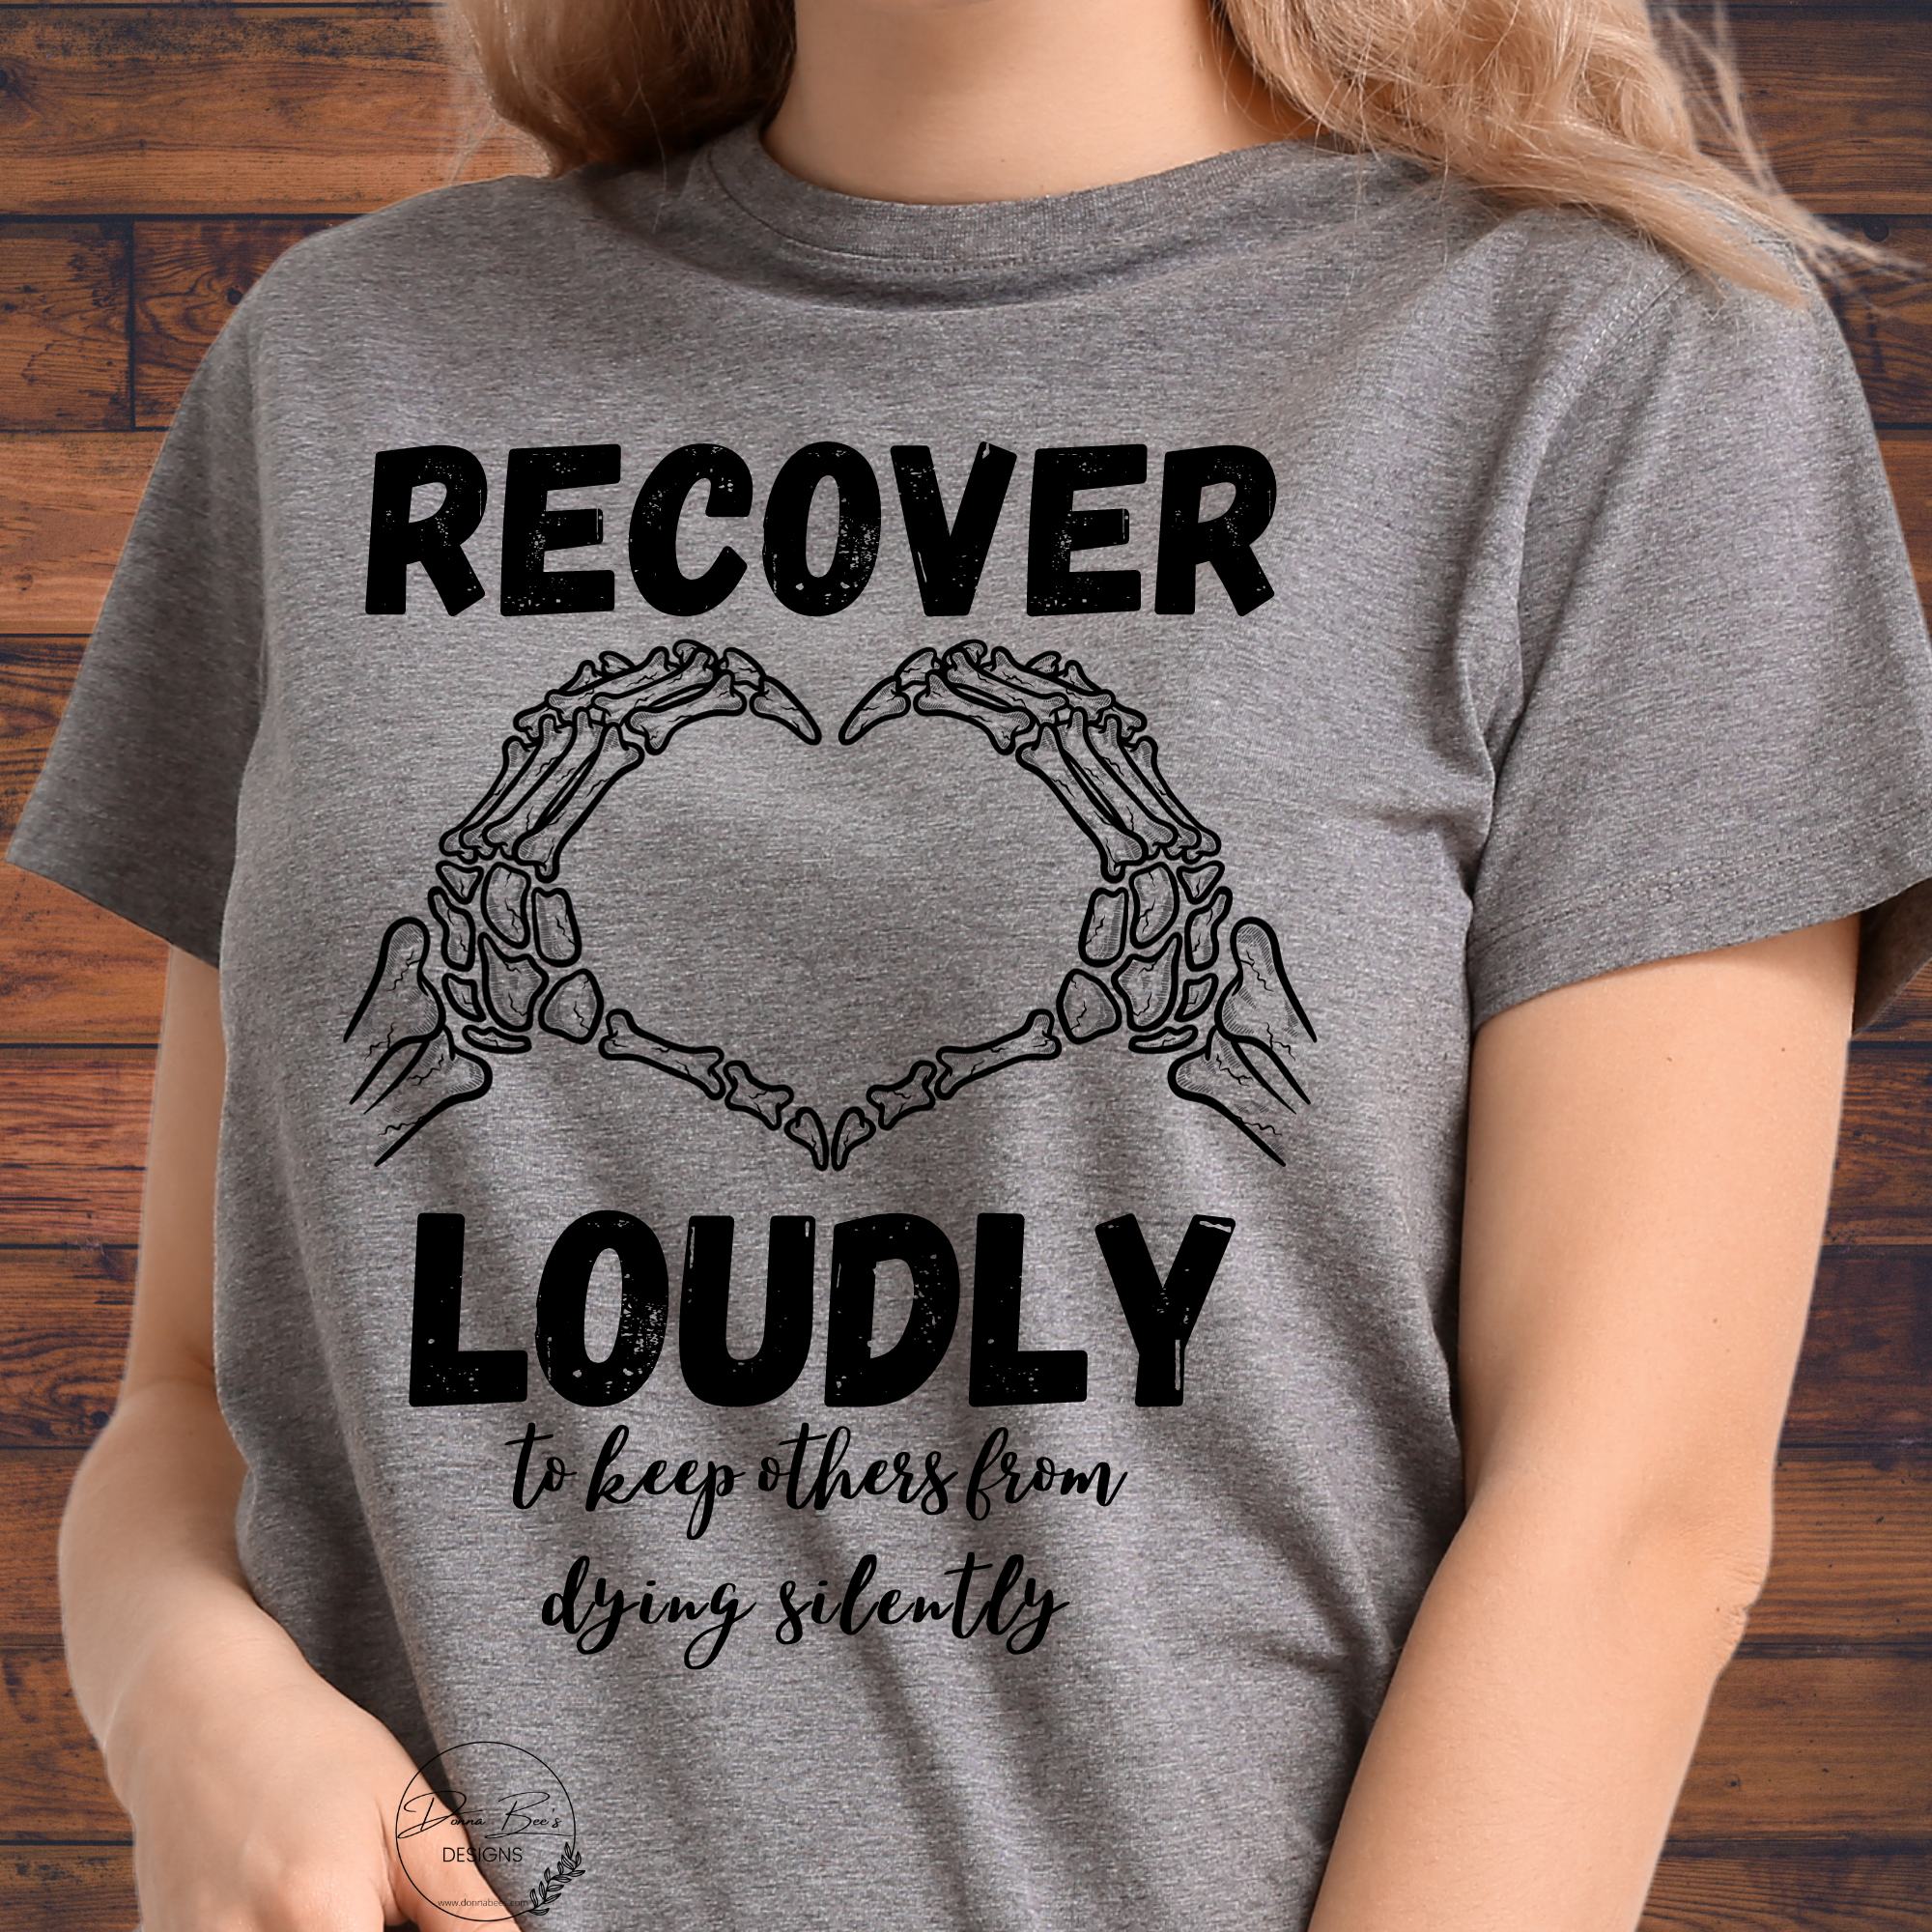 Recover Loudly to keep others from dying silently